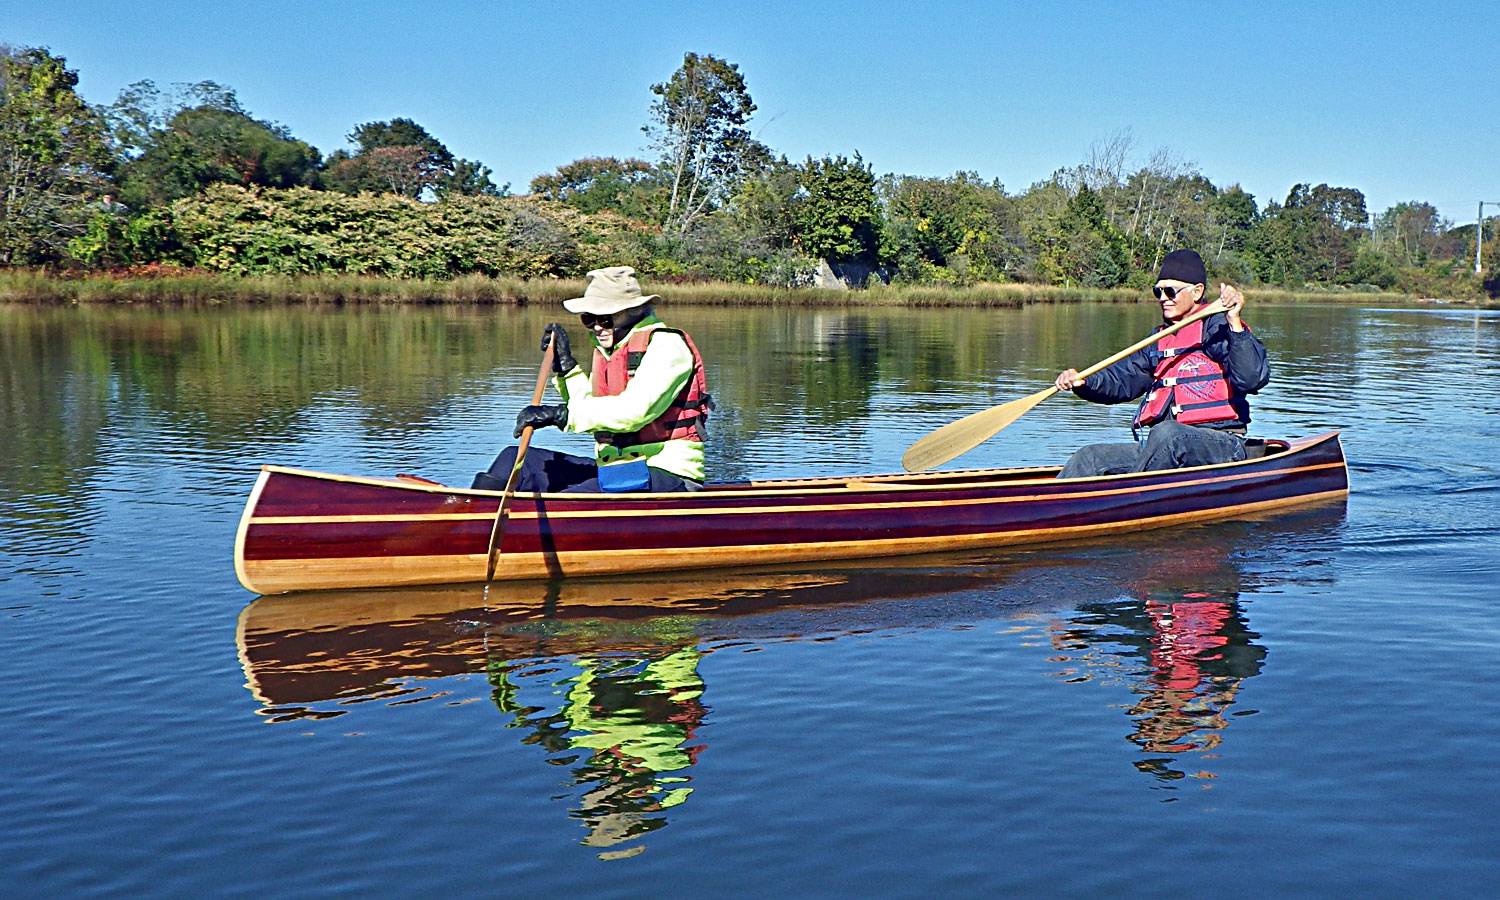 The Mystic River canoe is a traditional wood-strip tandem canoe for day trips and light touring on rivers, ponds and lakes